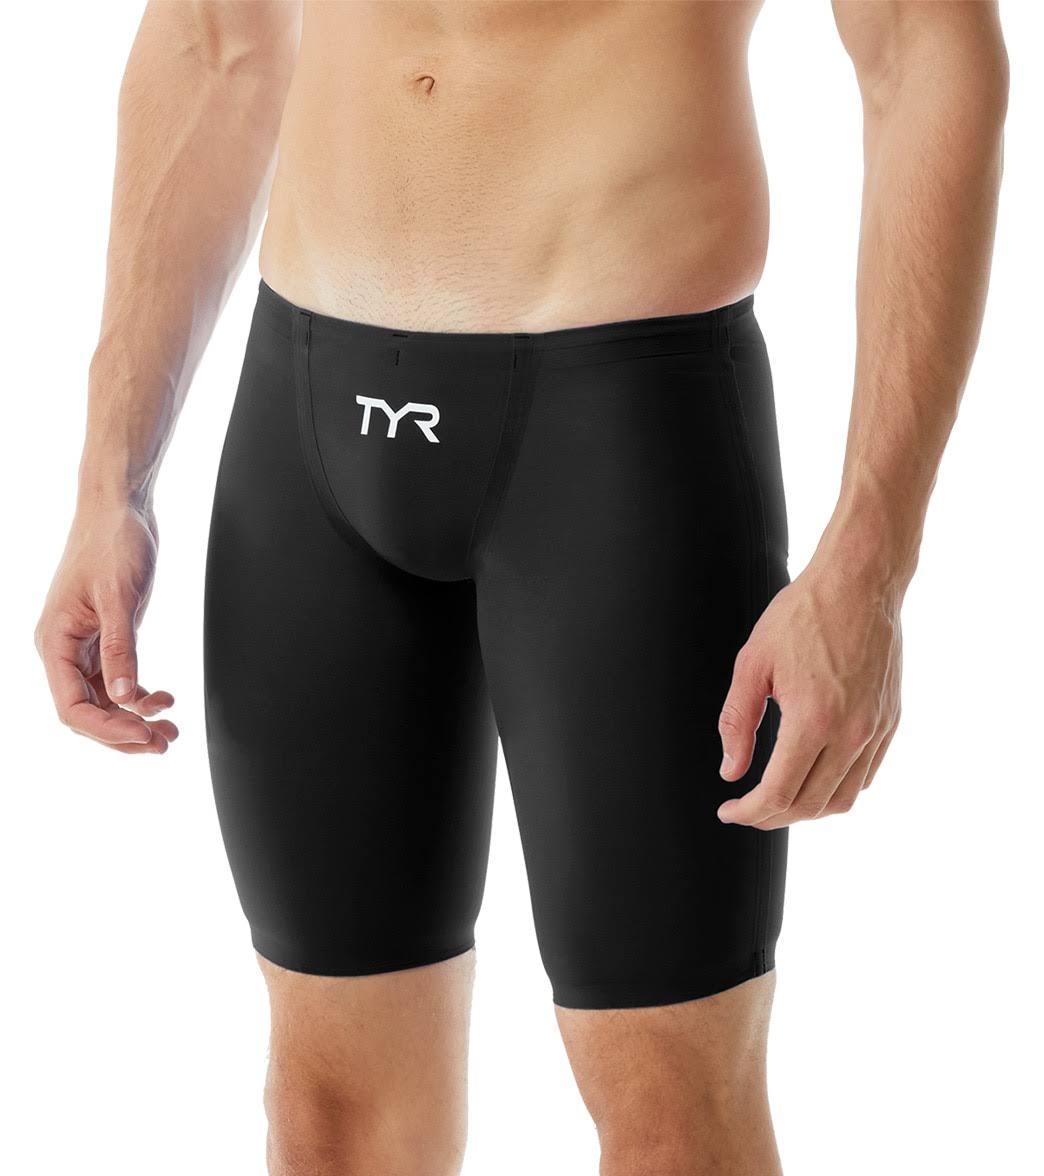 Tyr Invictus Solid Low Waisted Jammer Black 20 Man